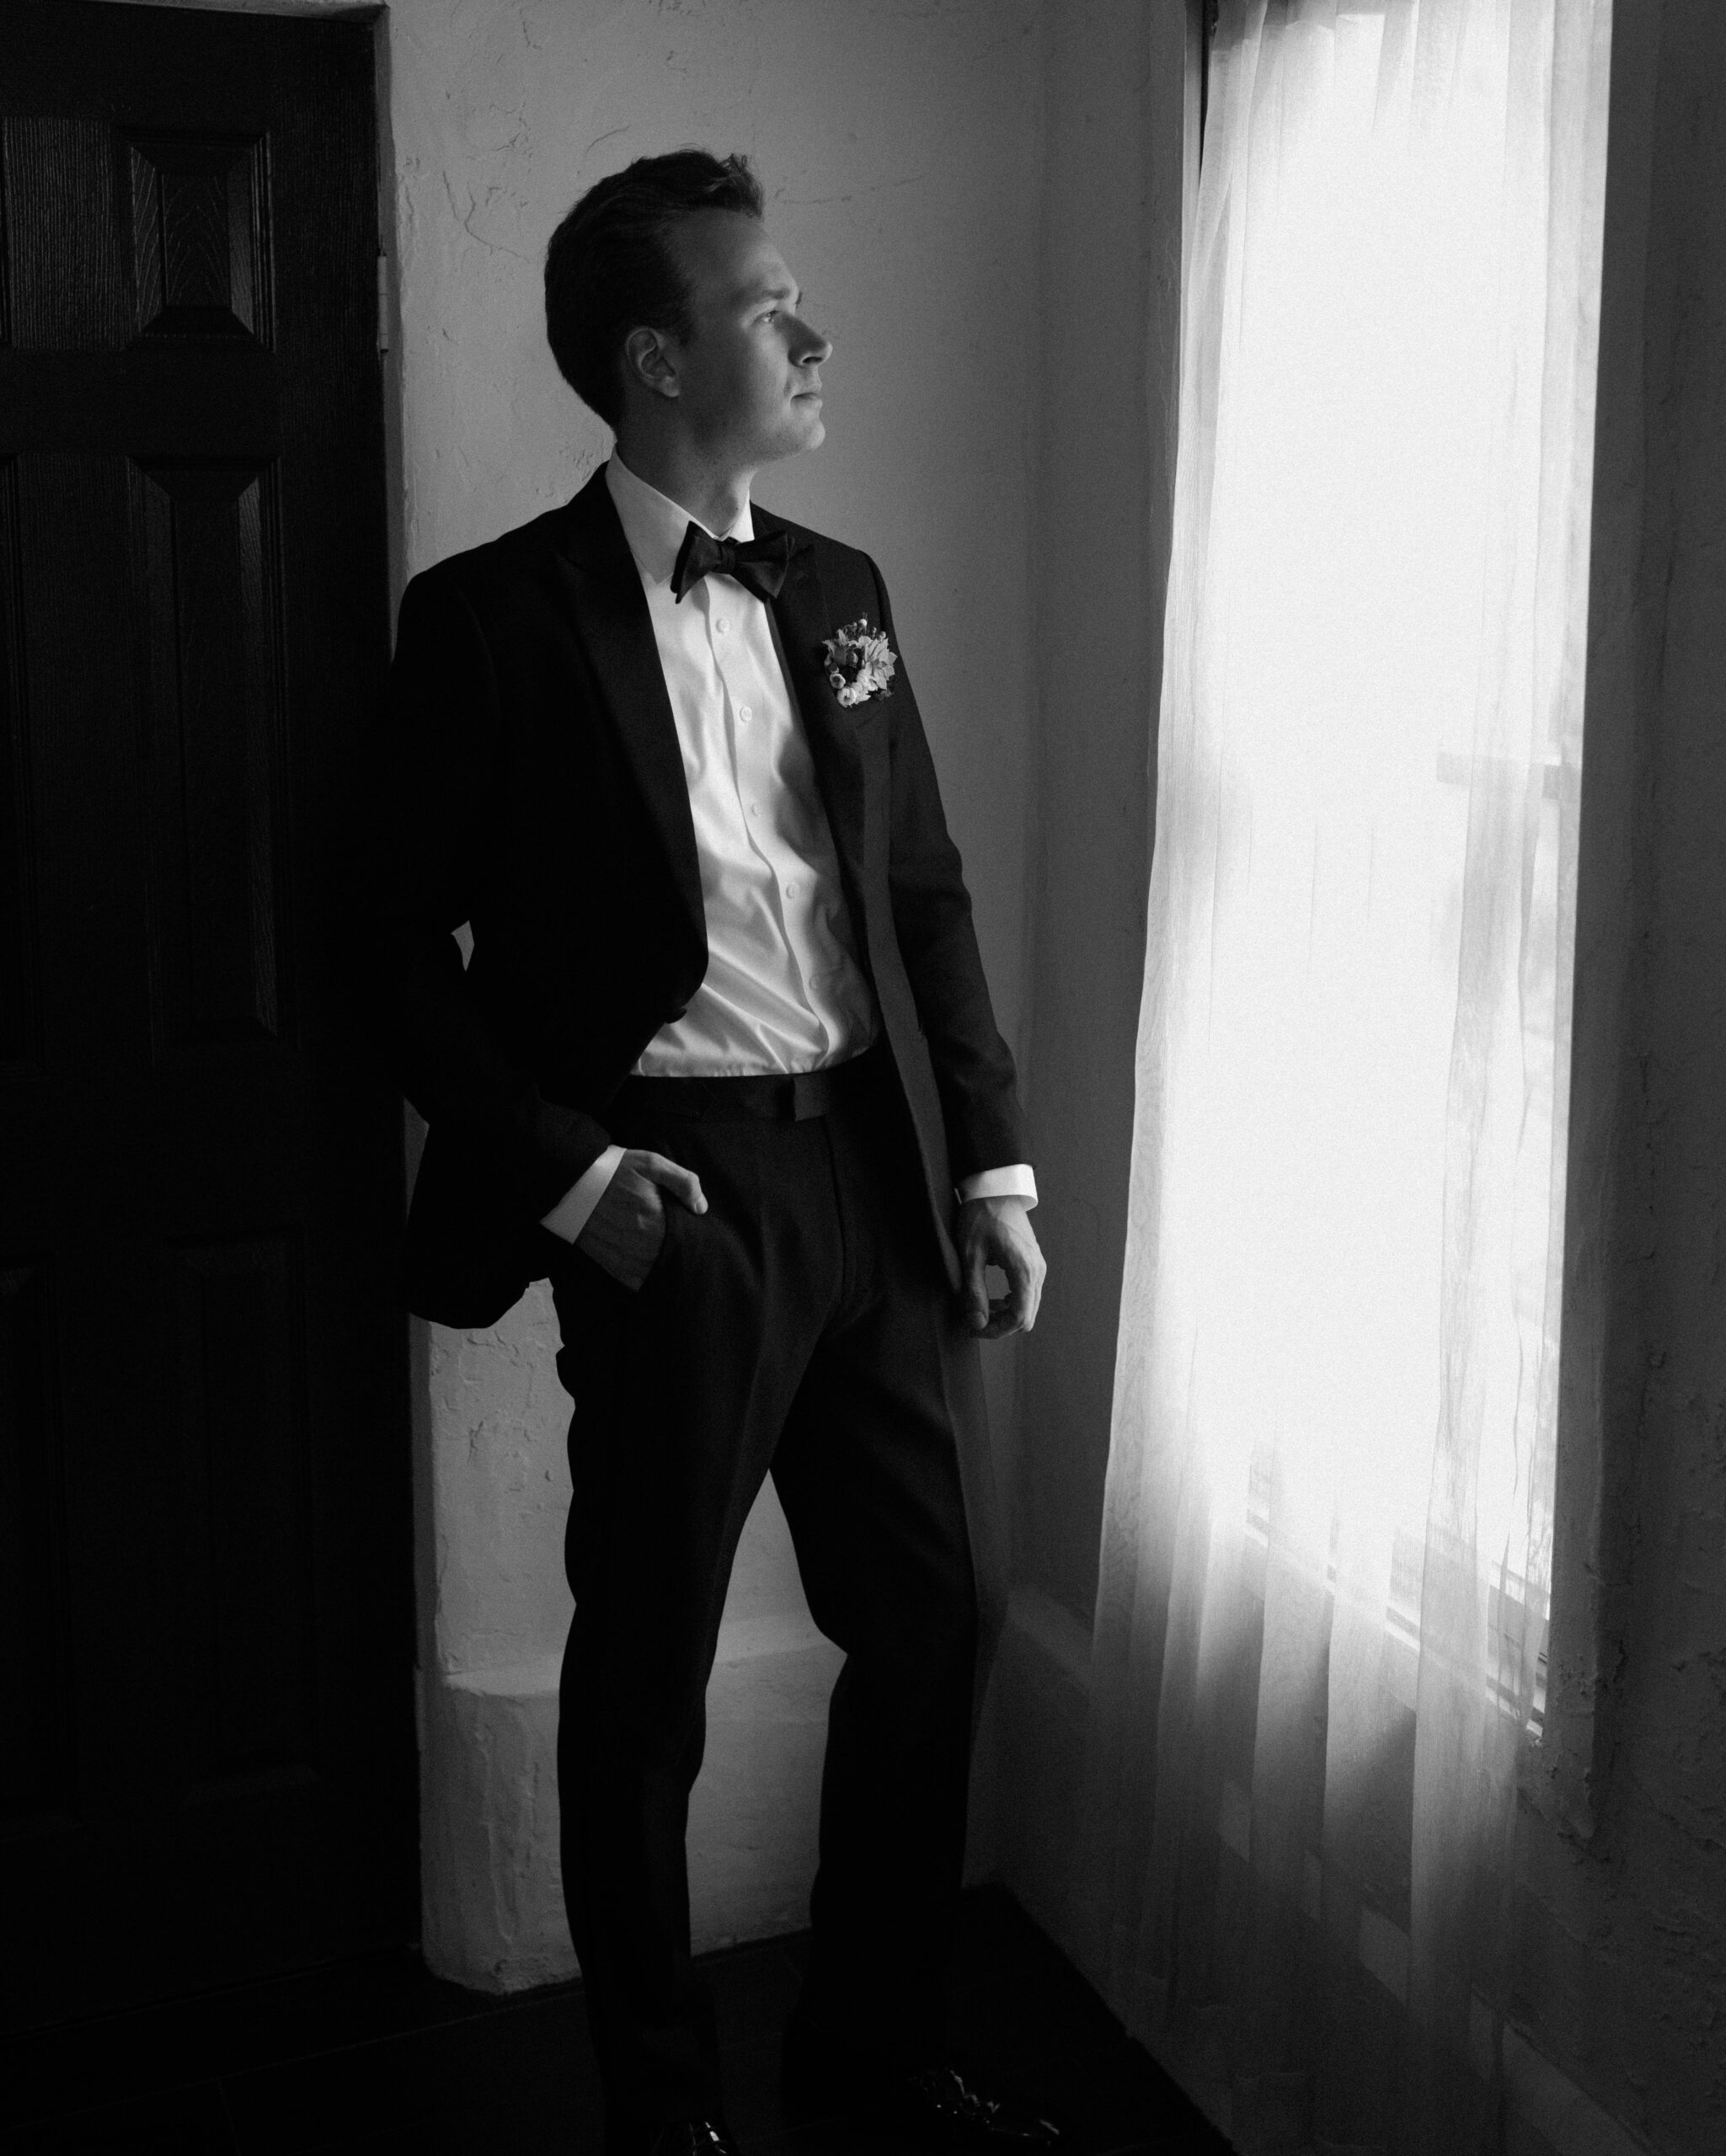 Black and white wedding photo of groom getting ready on his wedding day. The groom is wearing a classic black suit, white shirt and black bowtie.